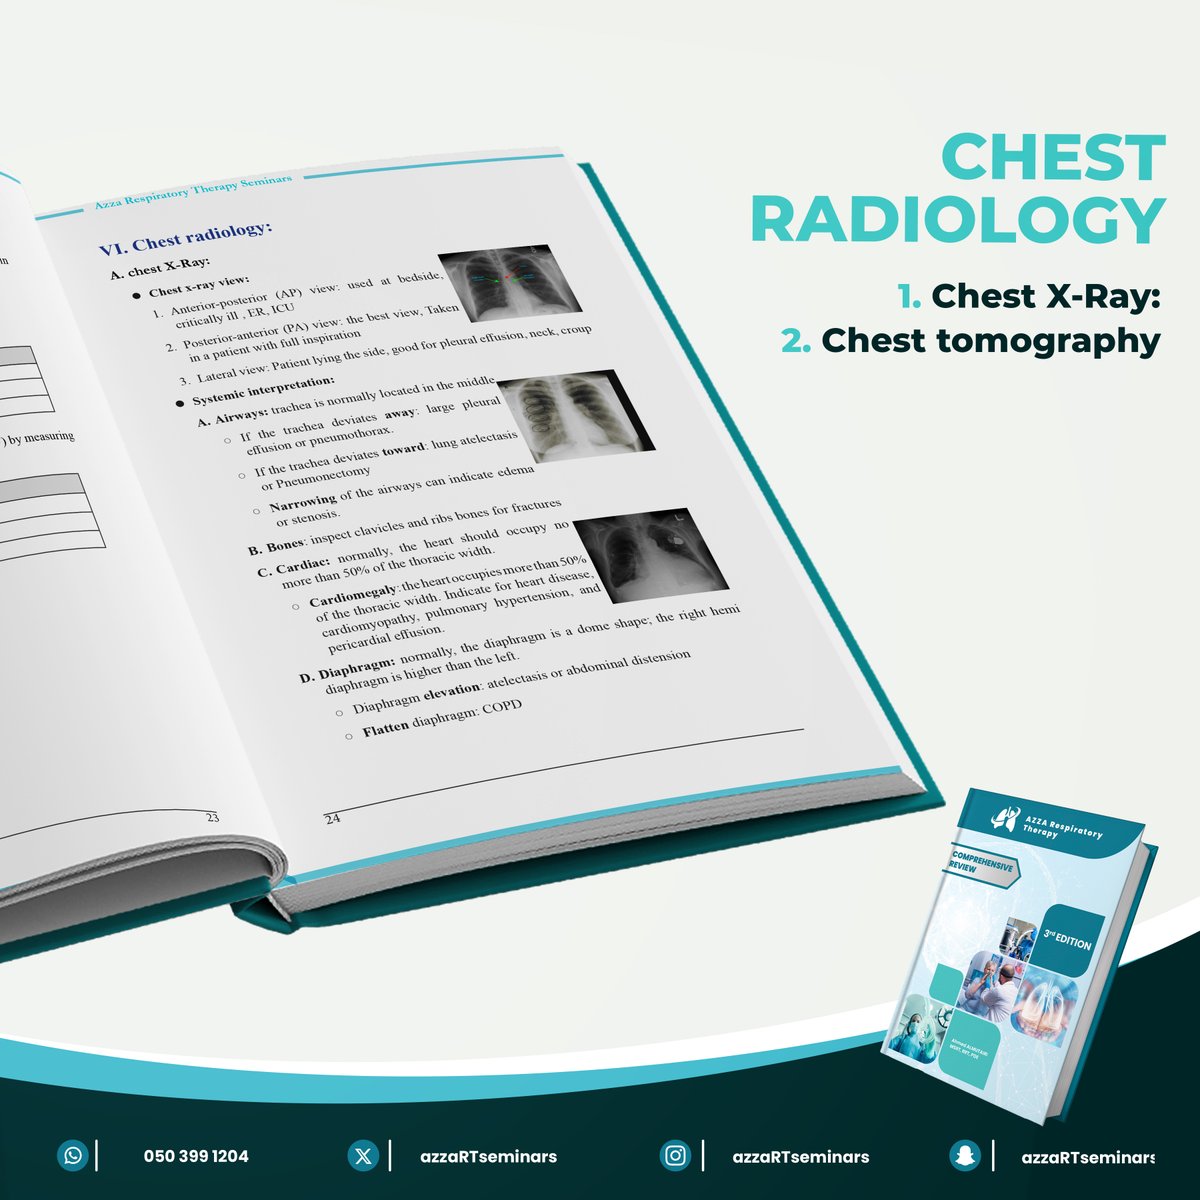 Master the art of chest imaging! Dive into X-ray and CT techniques with our Comprehensive Review Book! Enhance your skills in respiratory therapy with all the essential info in one place.
Get your discounted copy now: salla.sa/azzartseminars…

#RespiratoryTherapy #ChestRadiology📖